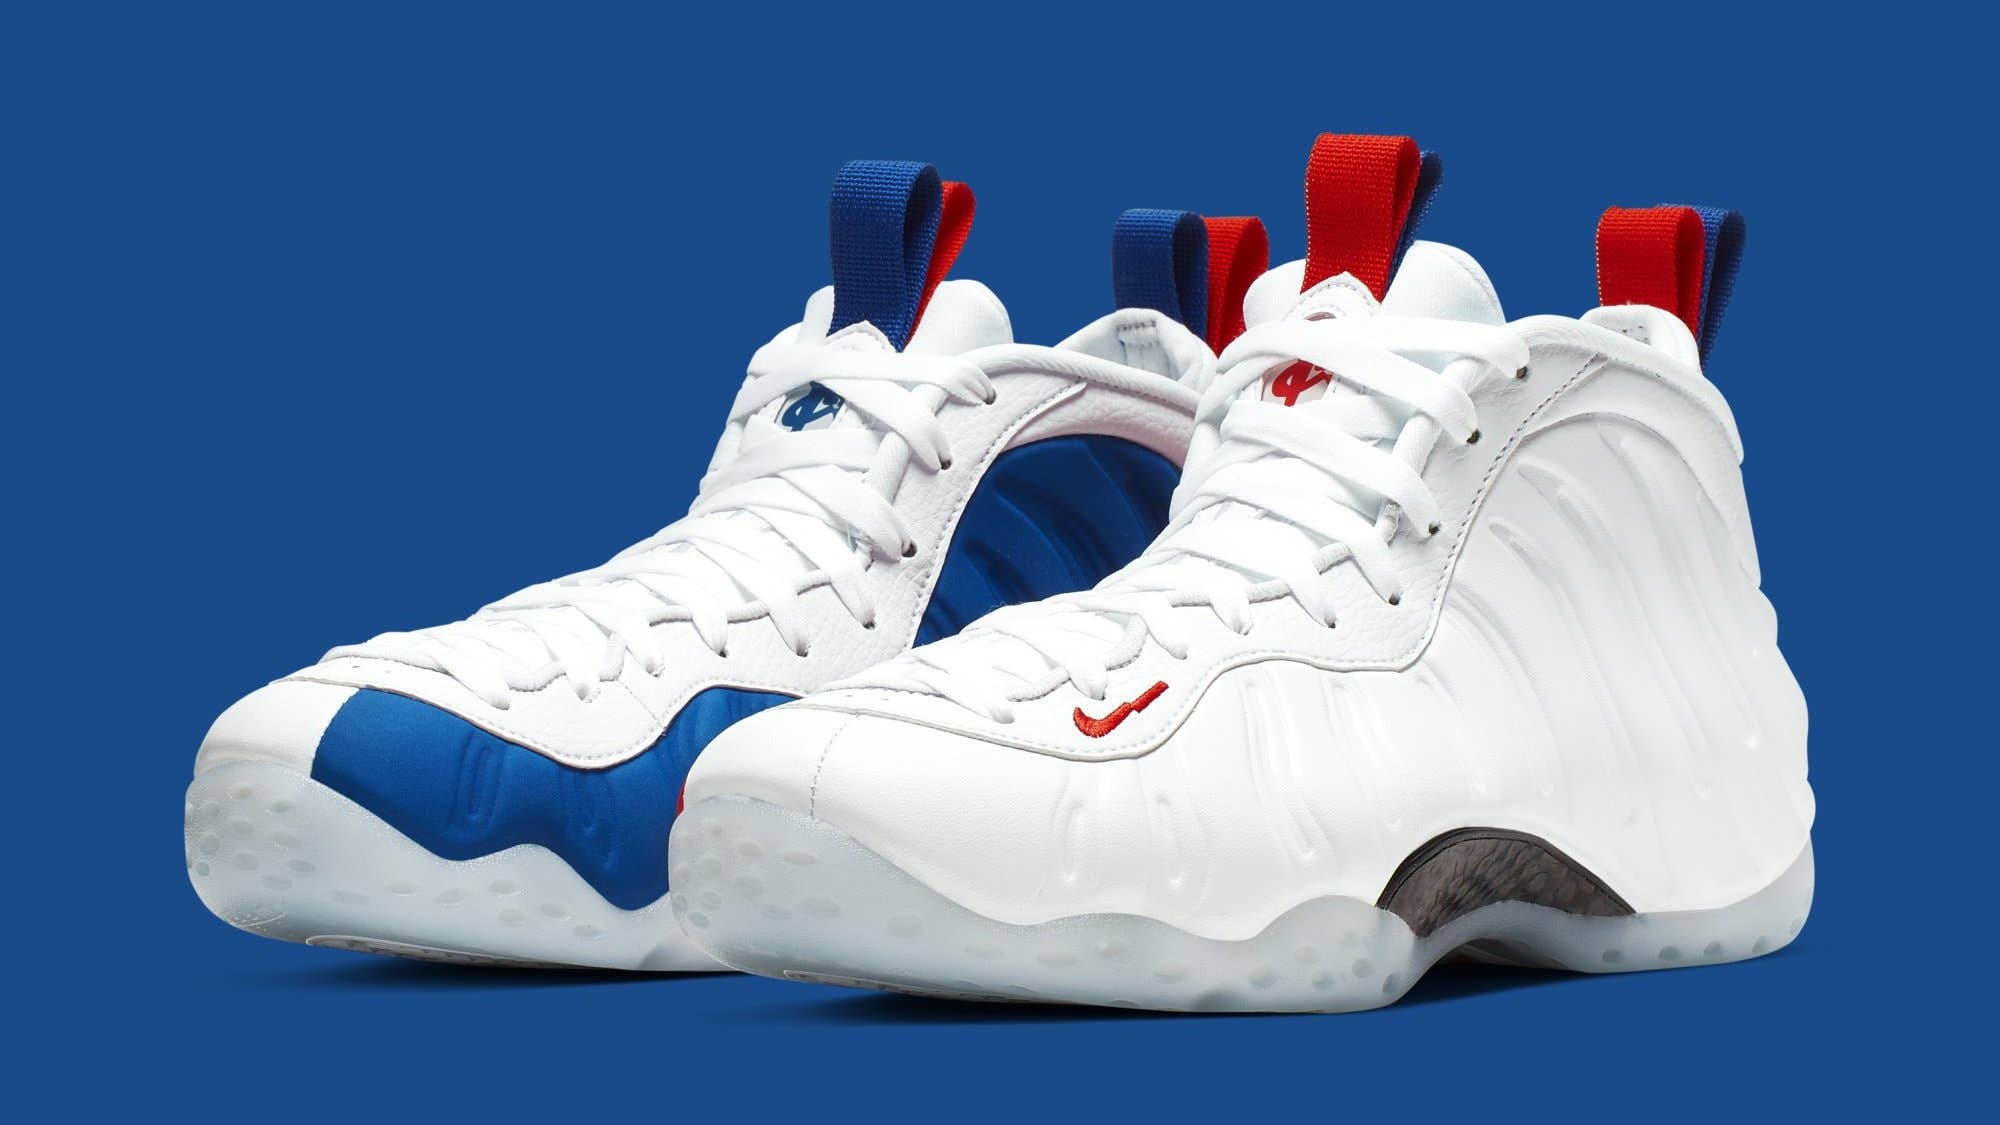 This Patriotic Nike Air Foamposite One Has Mismatched Uppers